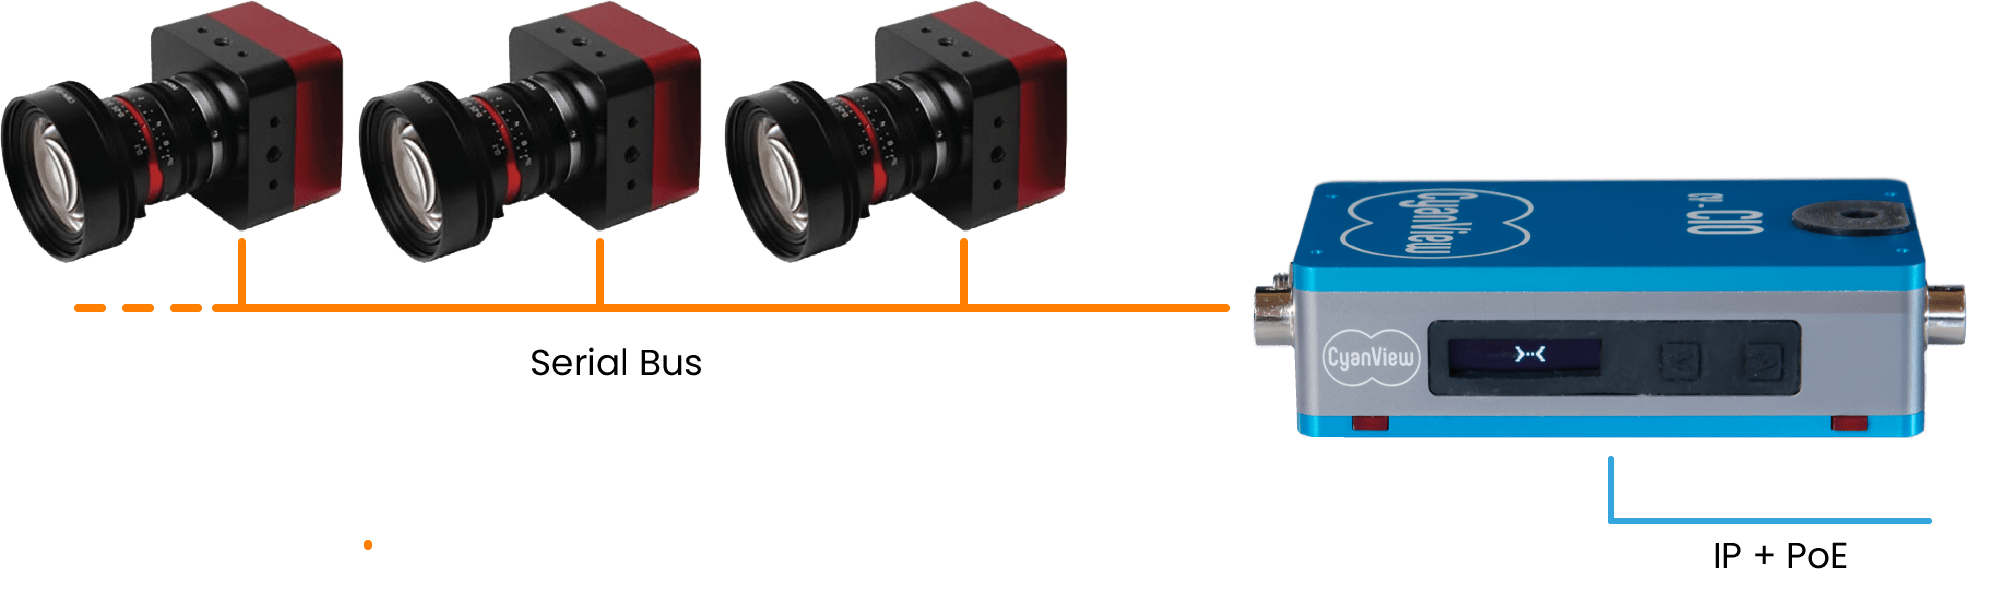 cyanview-support-CI0-manual-serial-bus-camera